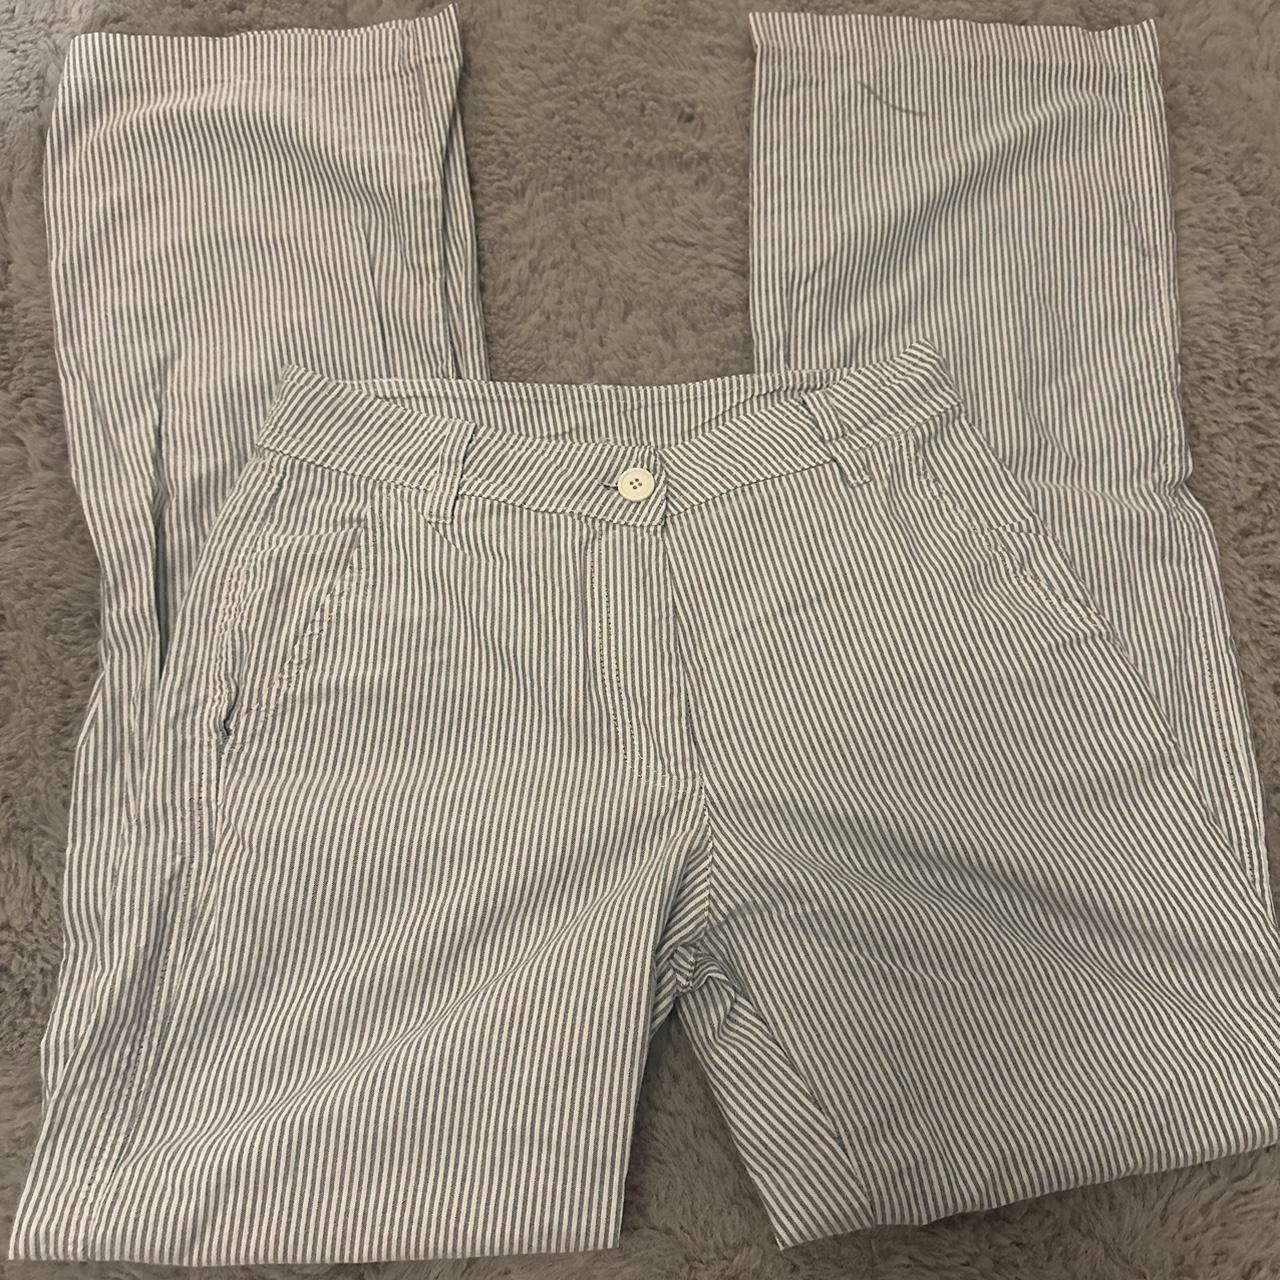 Stripped Pants, stain shown in last picture - Depop